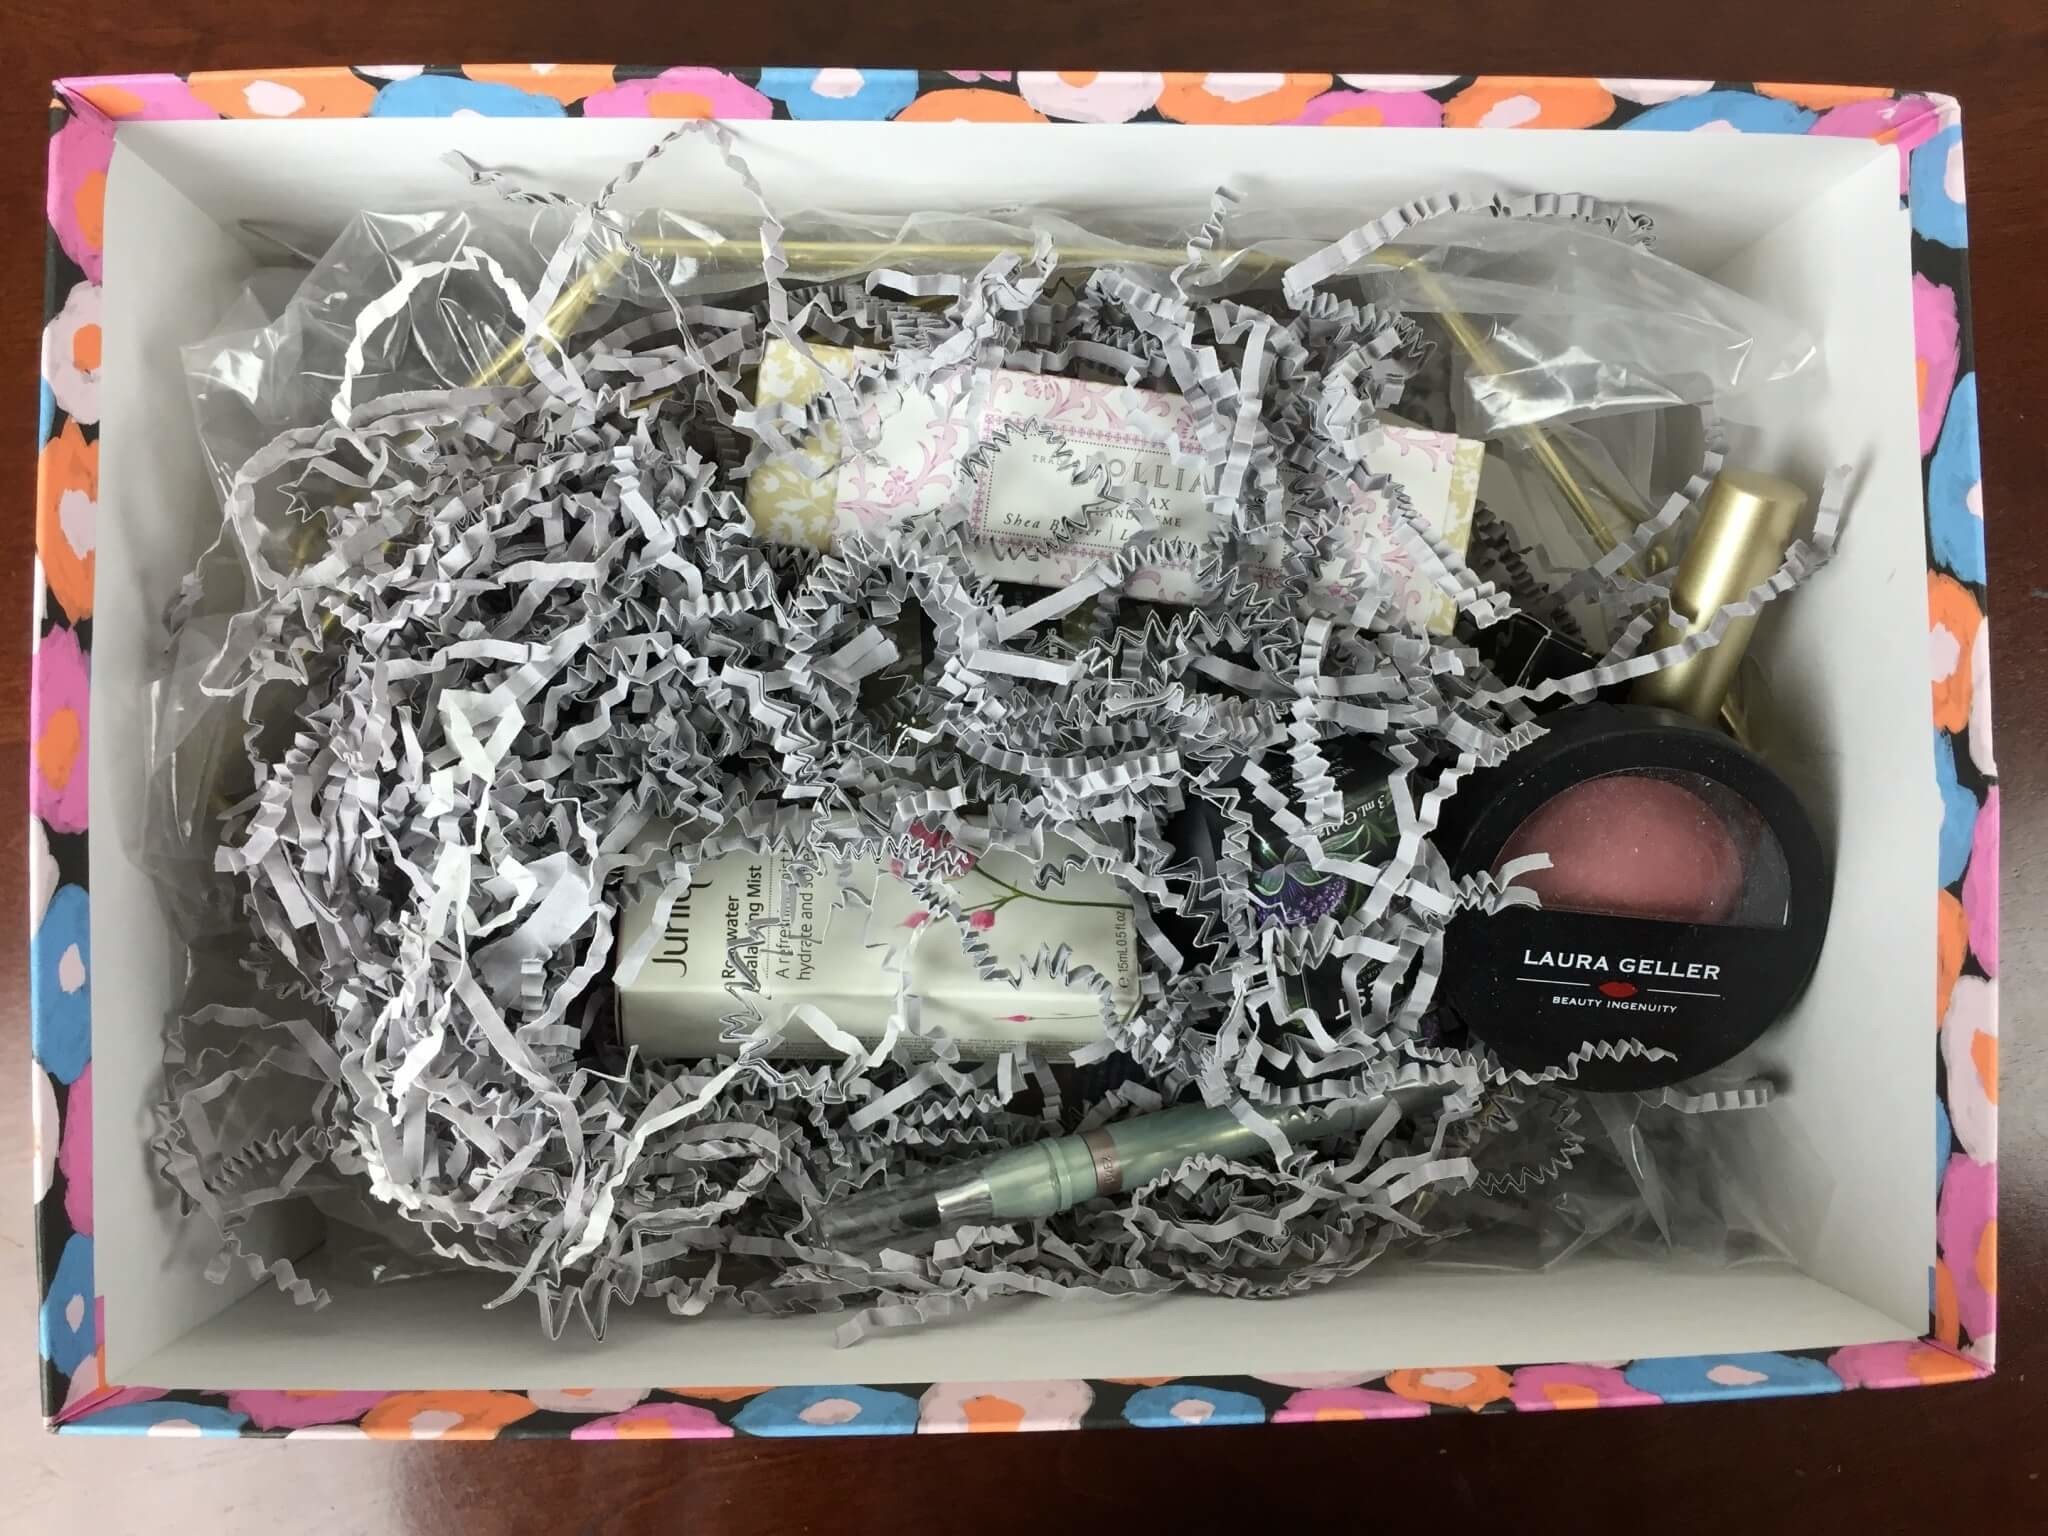 2048x1536 Birchbox Beauty in Bloom Box Review + Coupon Codes!